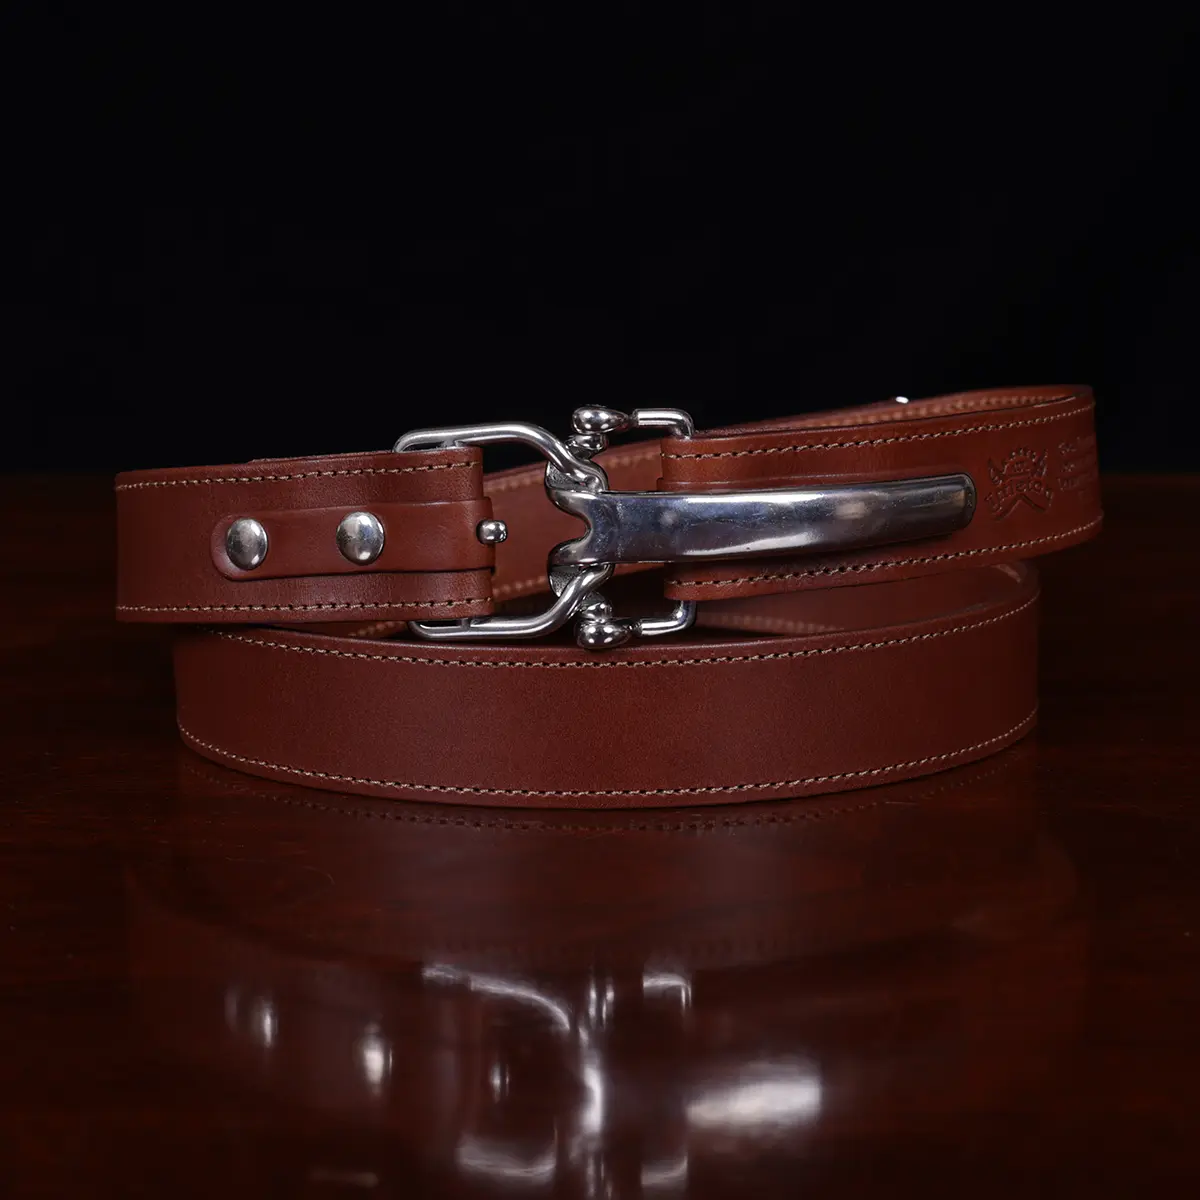 No. 5 Leather Cinch Belt - Italian Bridle Leather - Brown Leather with Stainless Steel, X-Large - Fits Sizes 42 - 50